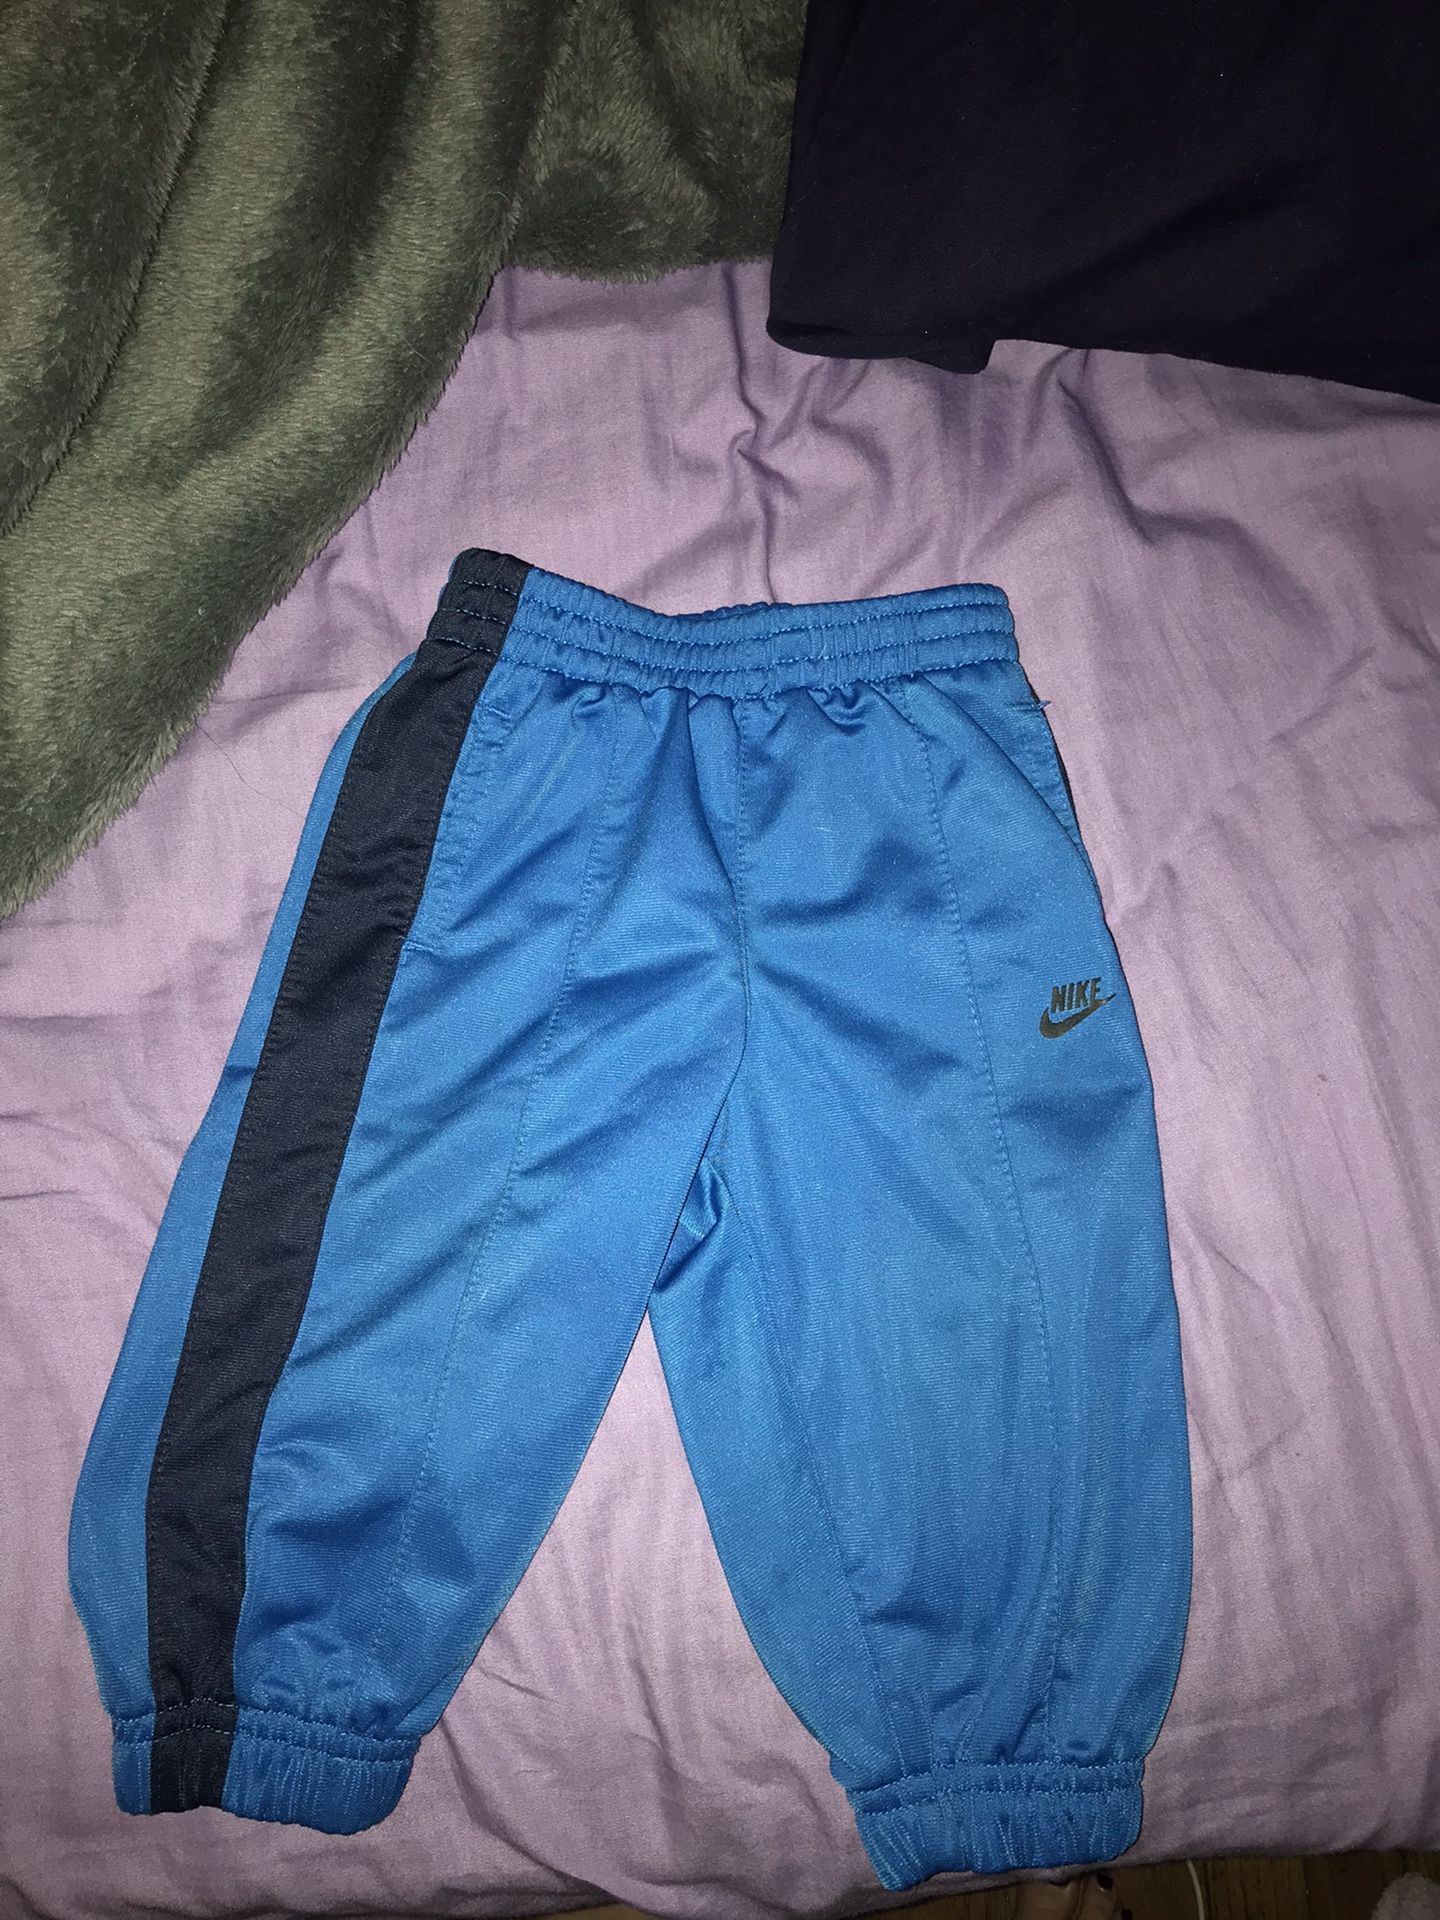 Baby Nike pants 6-9 months